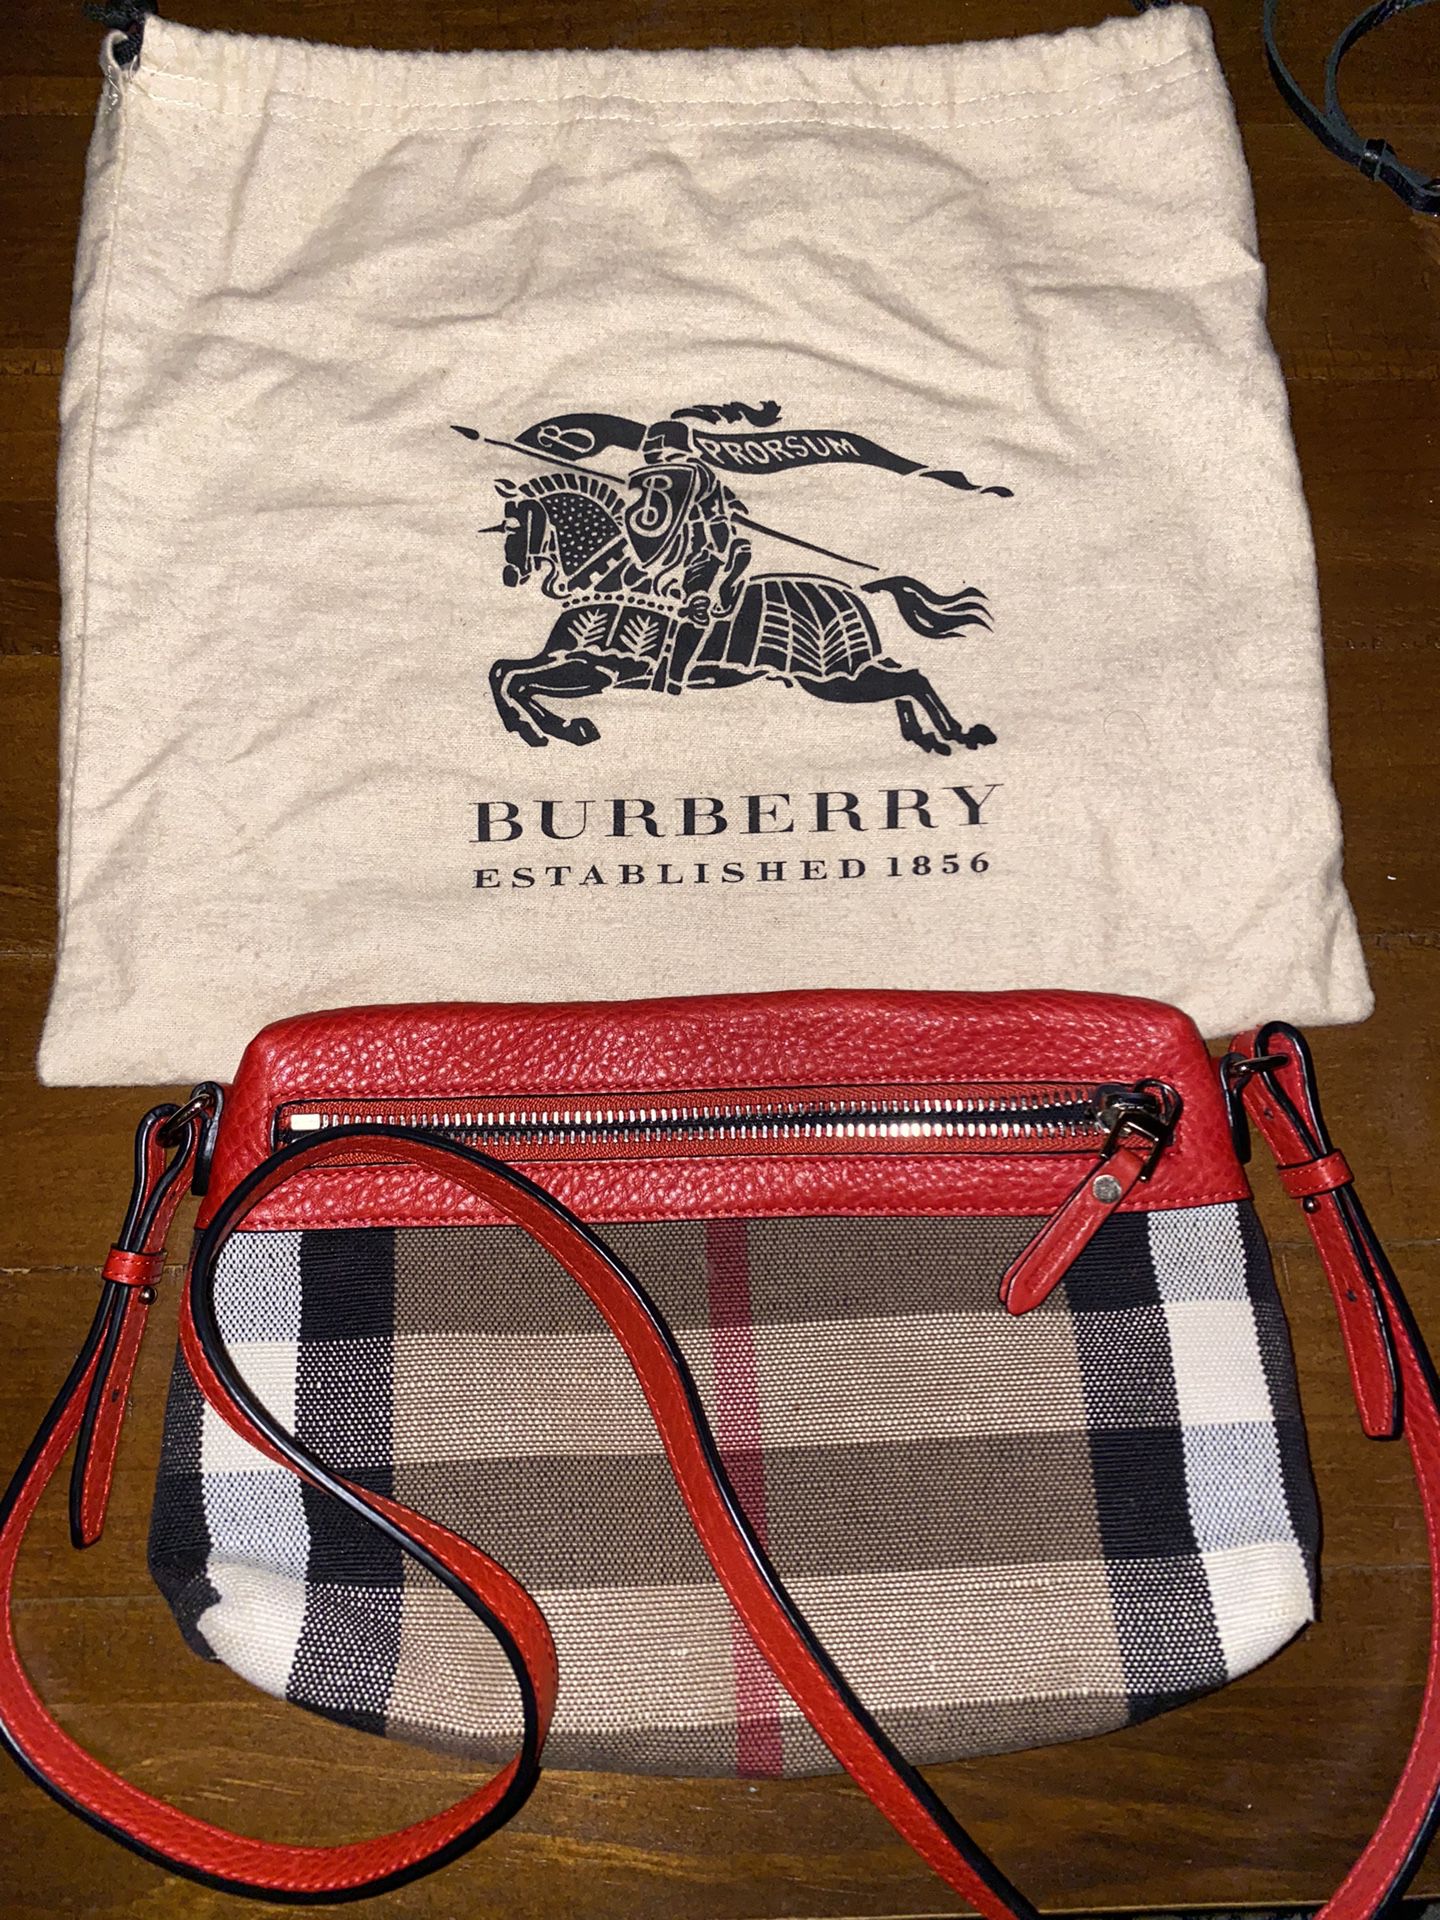 Cross Body Burberry Camera Bag for Sale in Des Plaines, IL - OfferUp